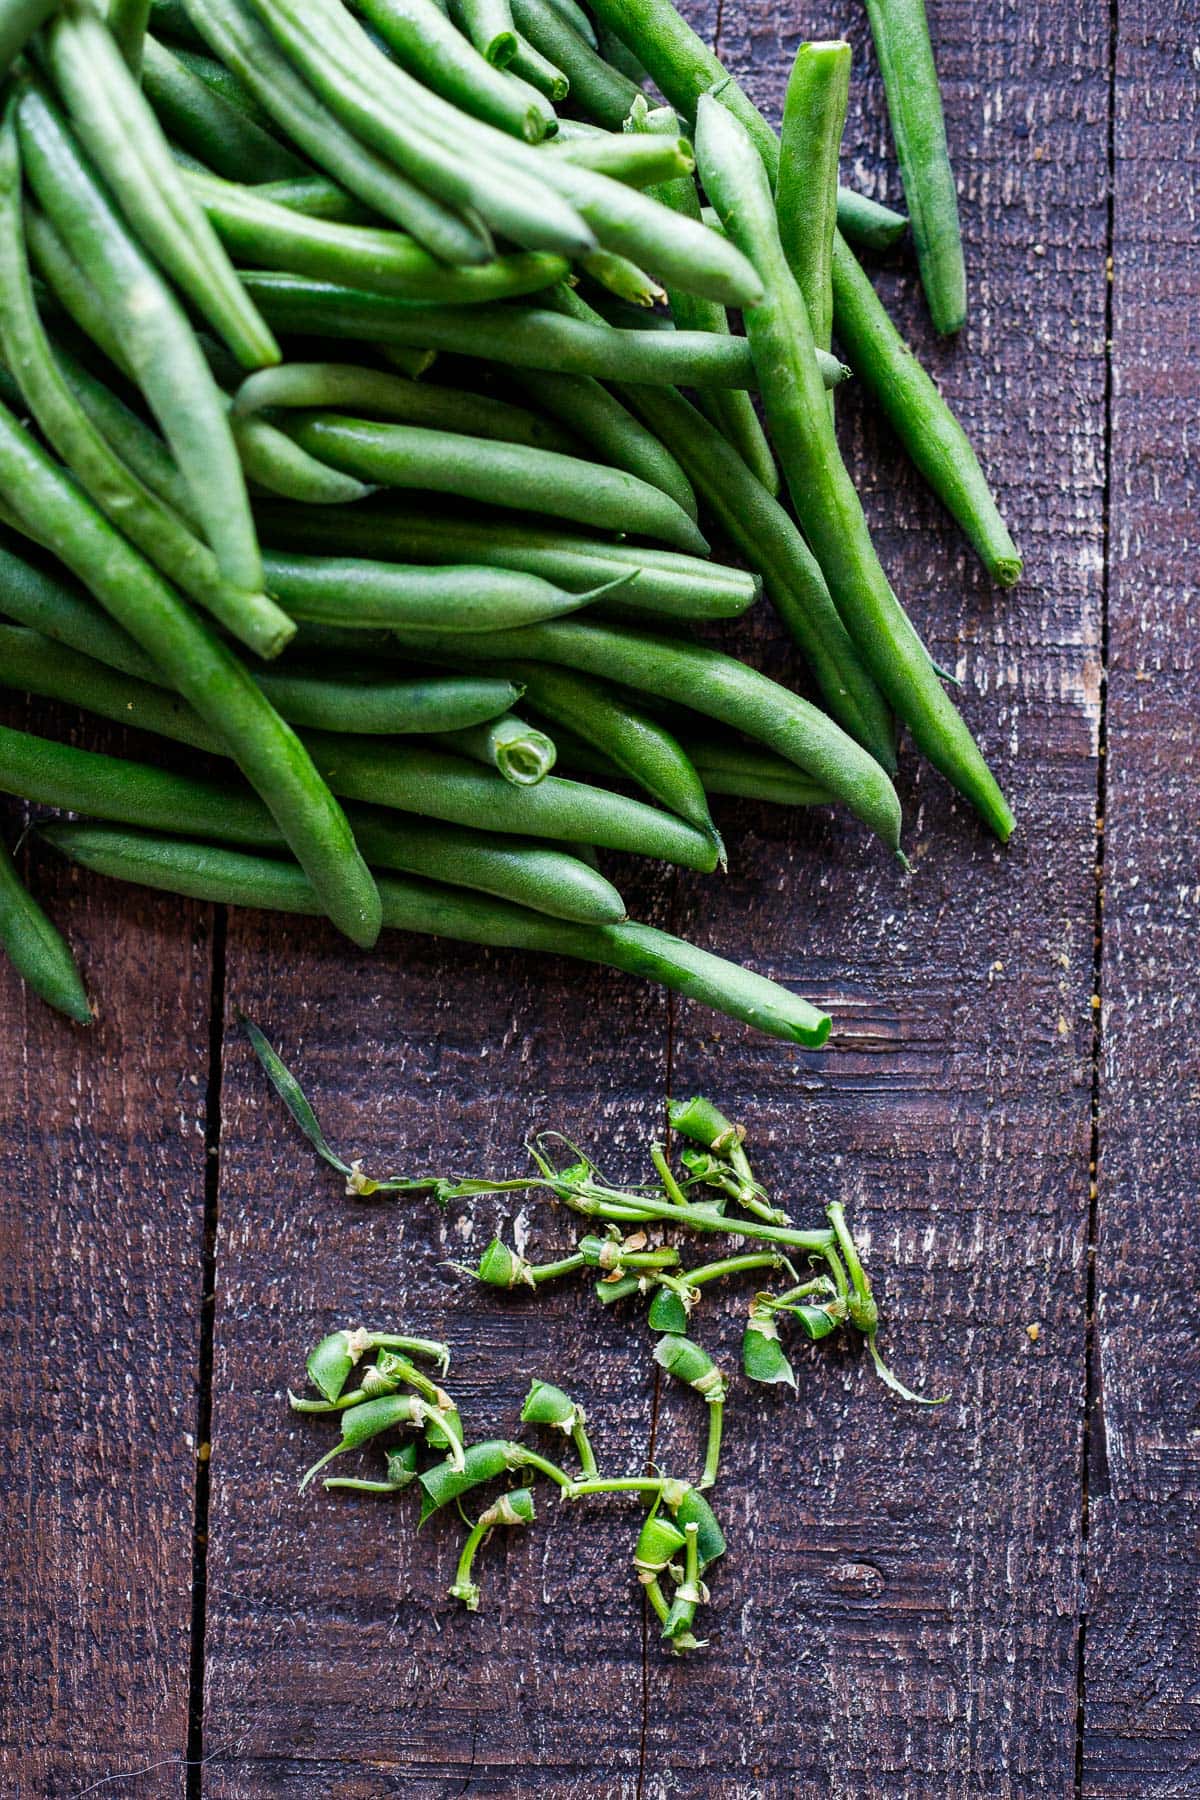 green beans with stem ends trimmed